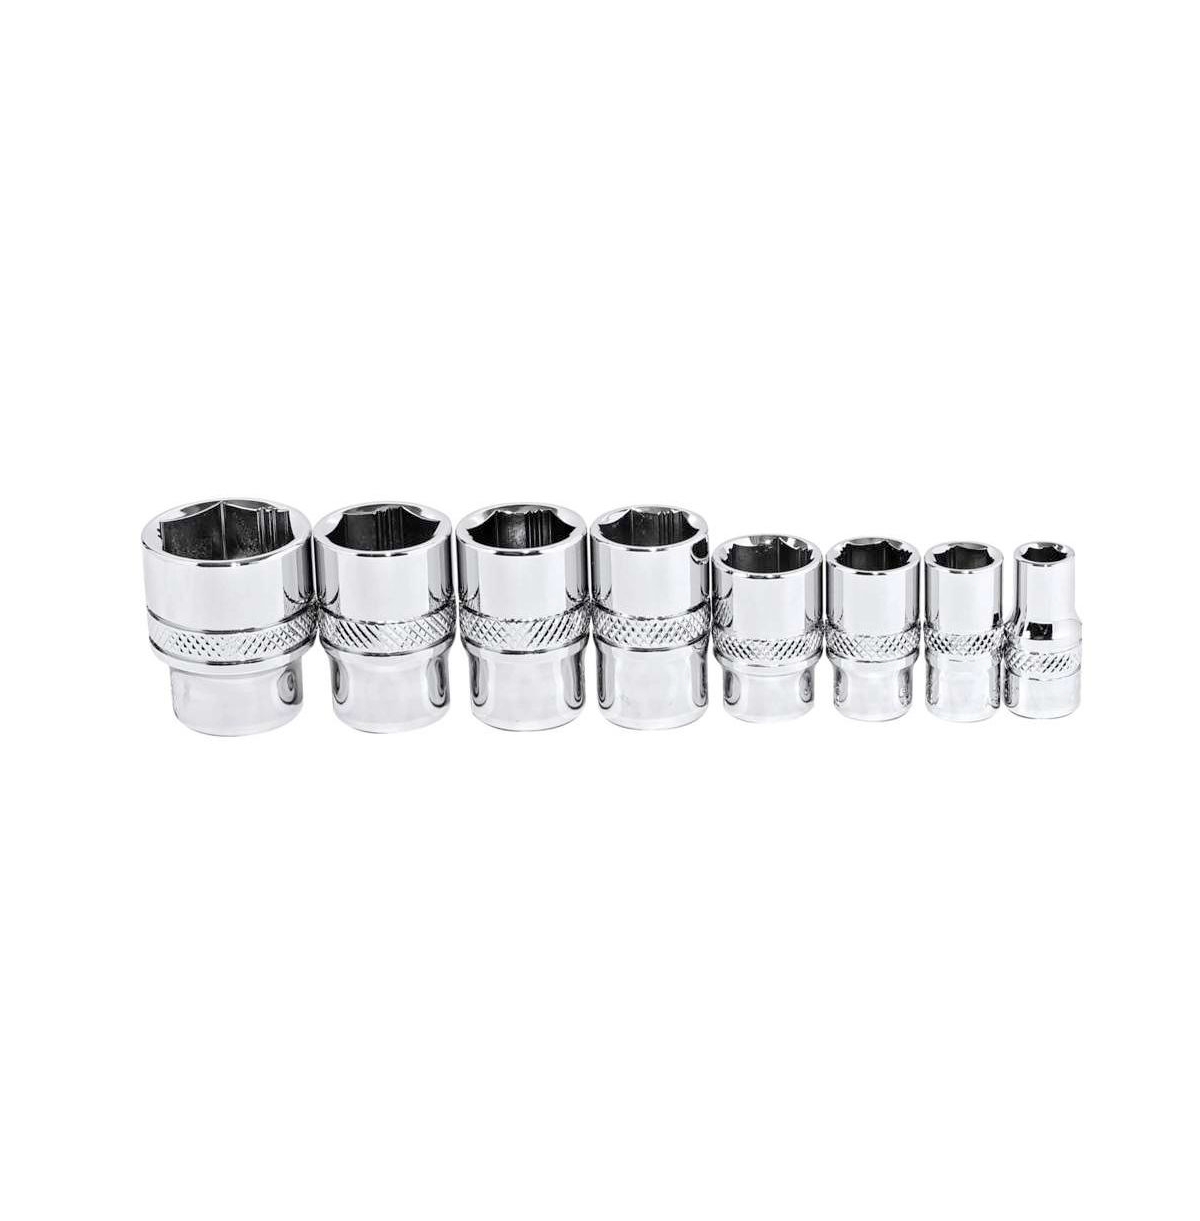 8 Piece Zeon Sae Socket Set for Damaged Bolts - Silver